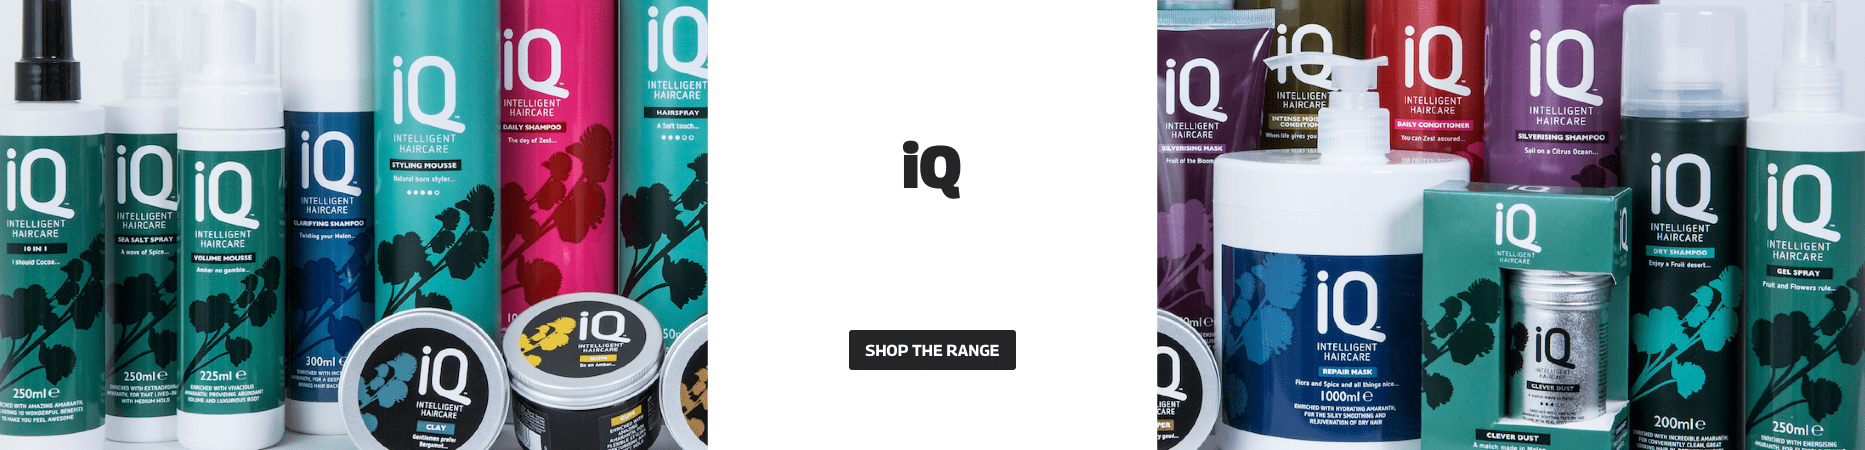 iQ hair care products